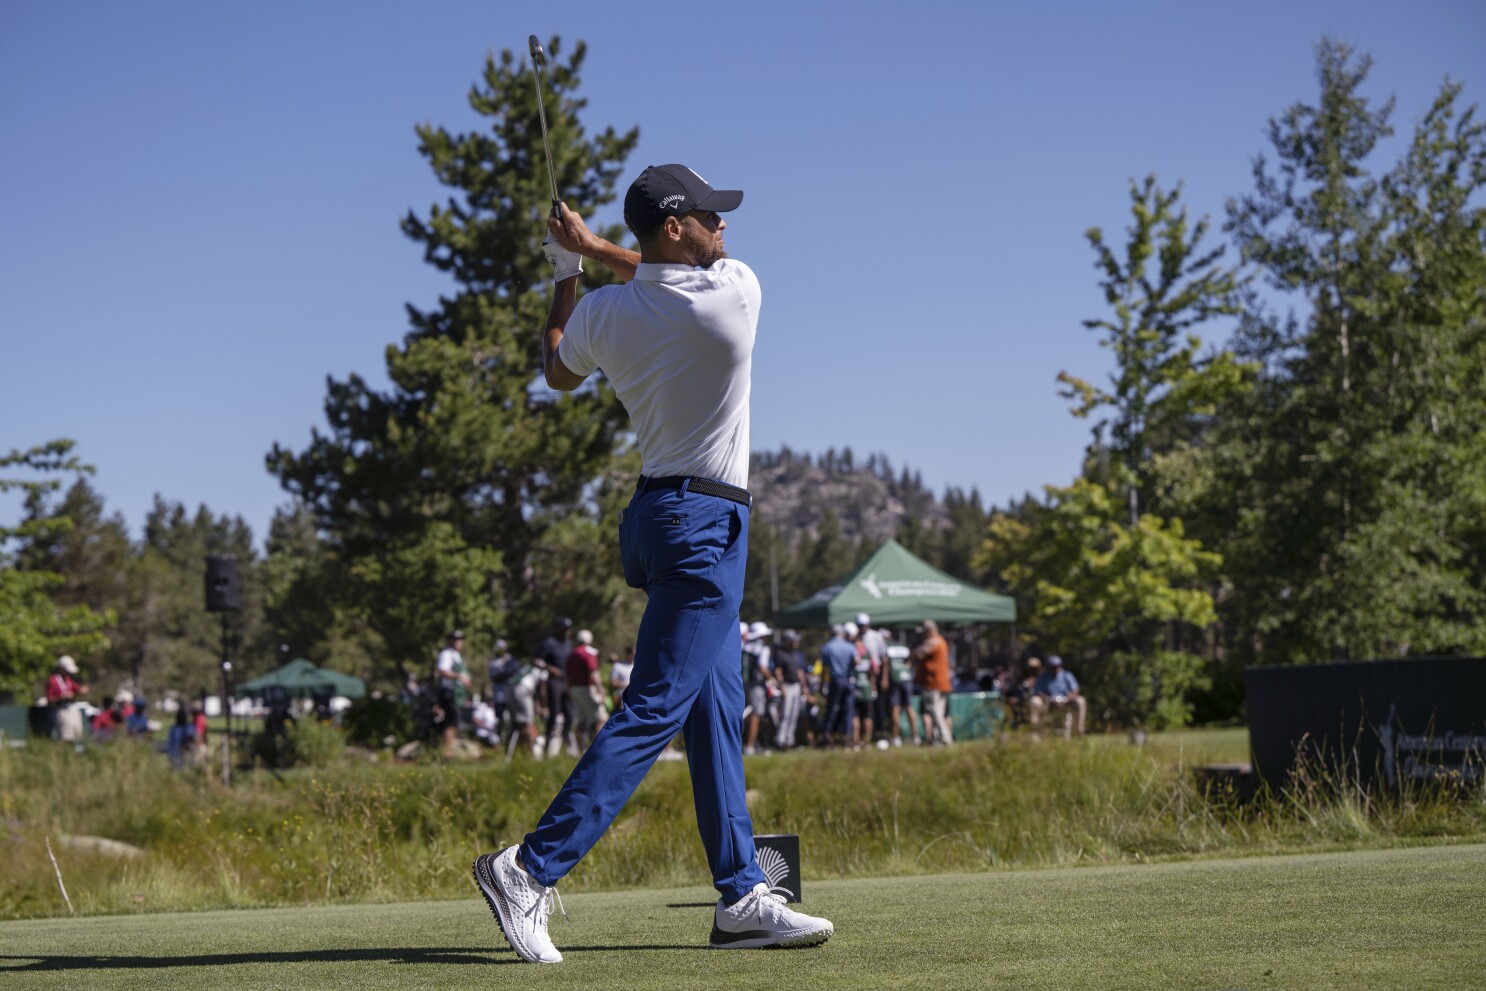 All The Highlights From Steph Curry's First Professional Golf Round